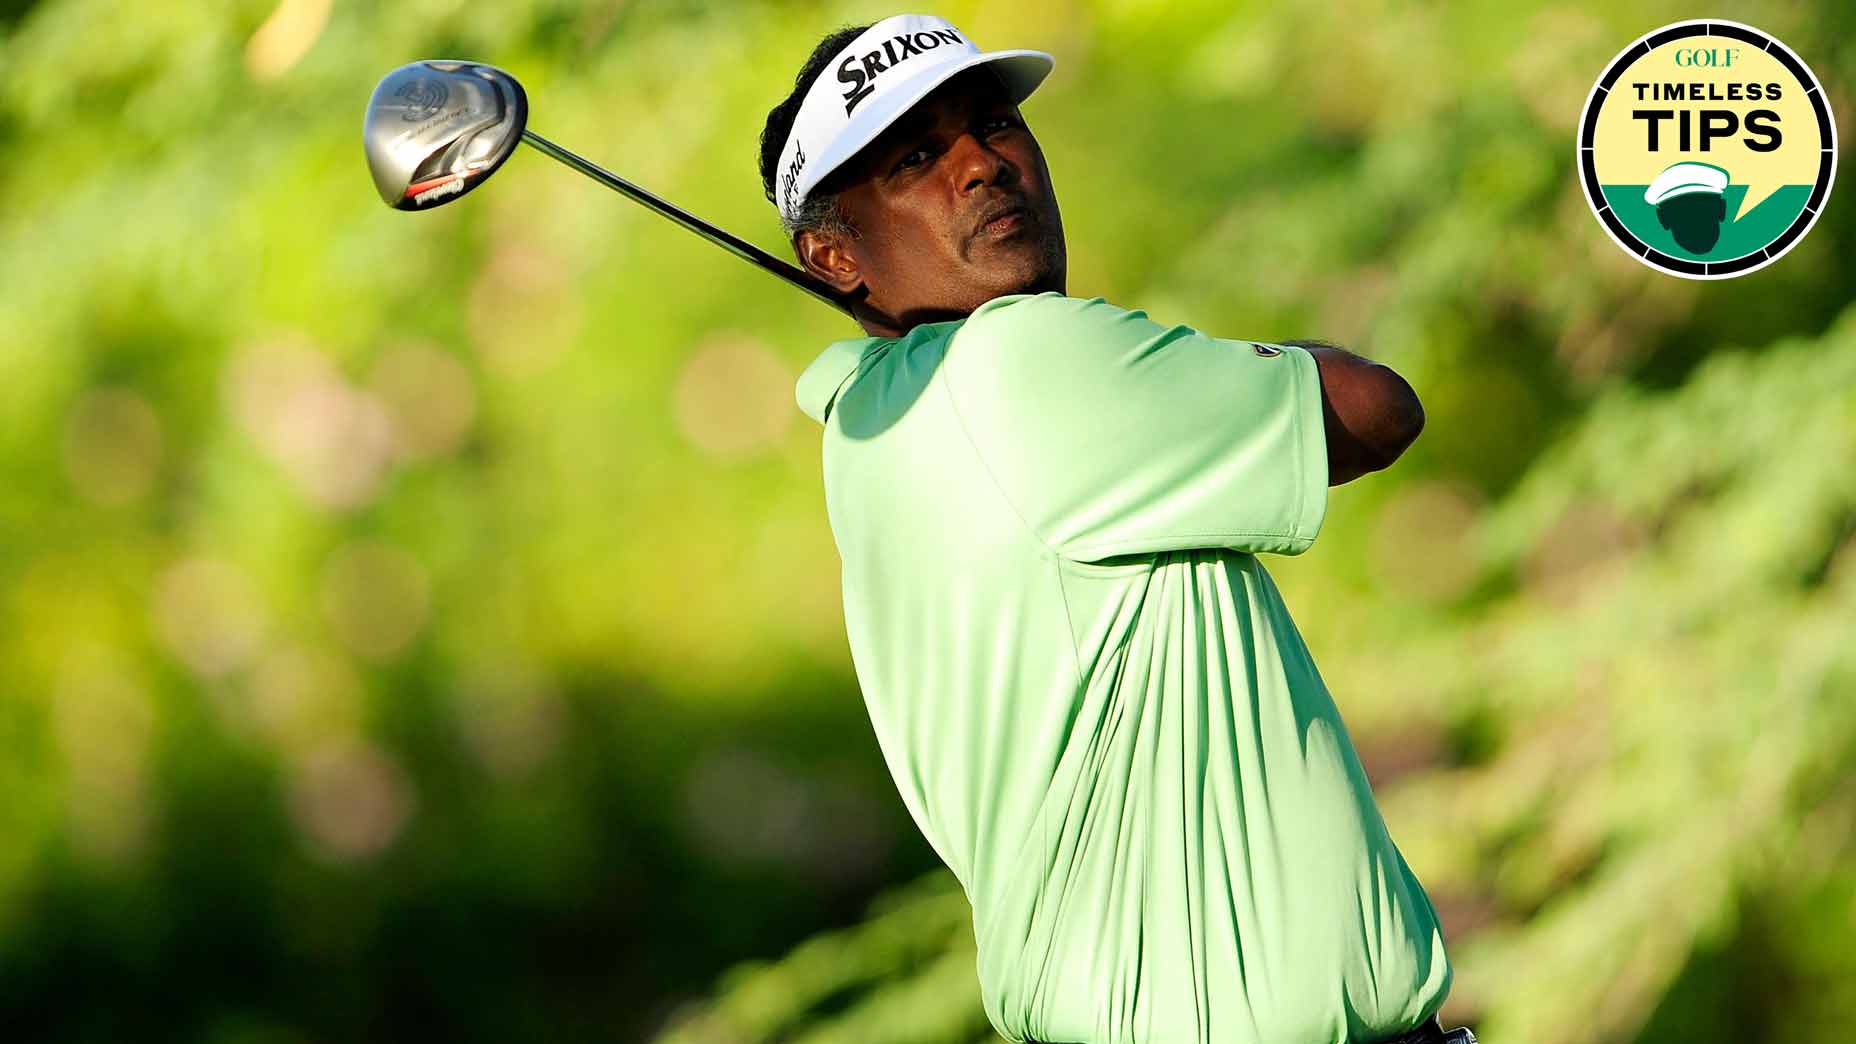 vijay singh hits a tee shot during the 2010 sony open